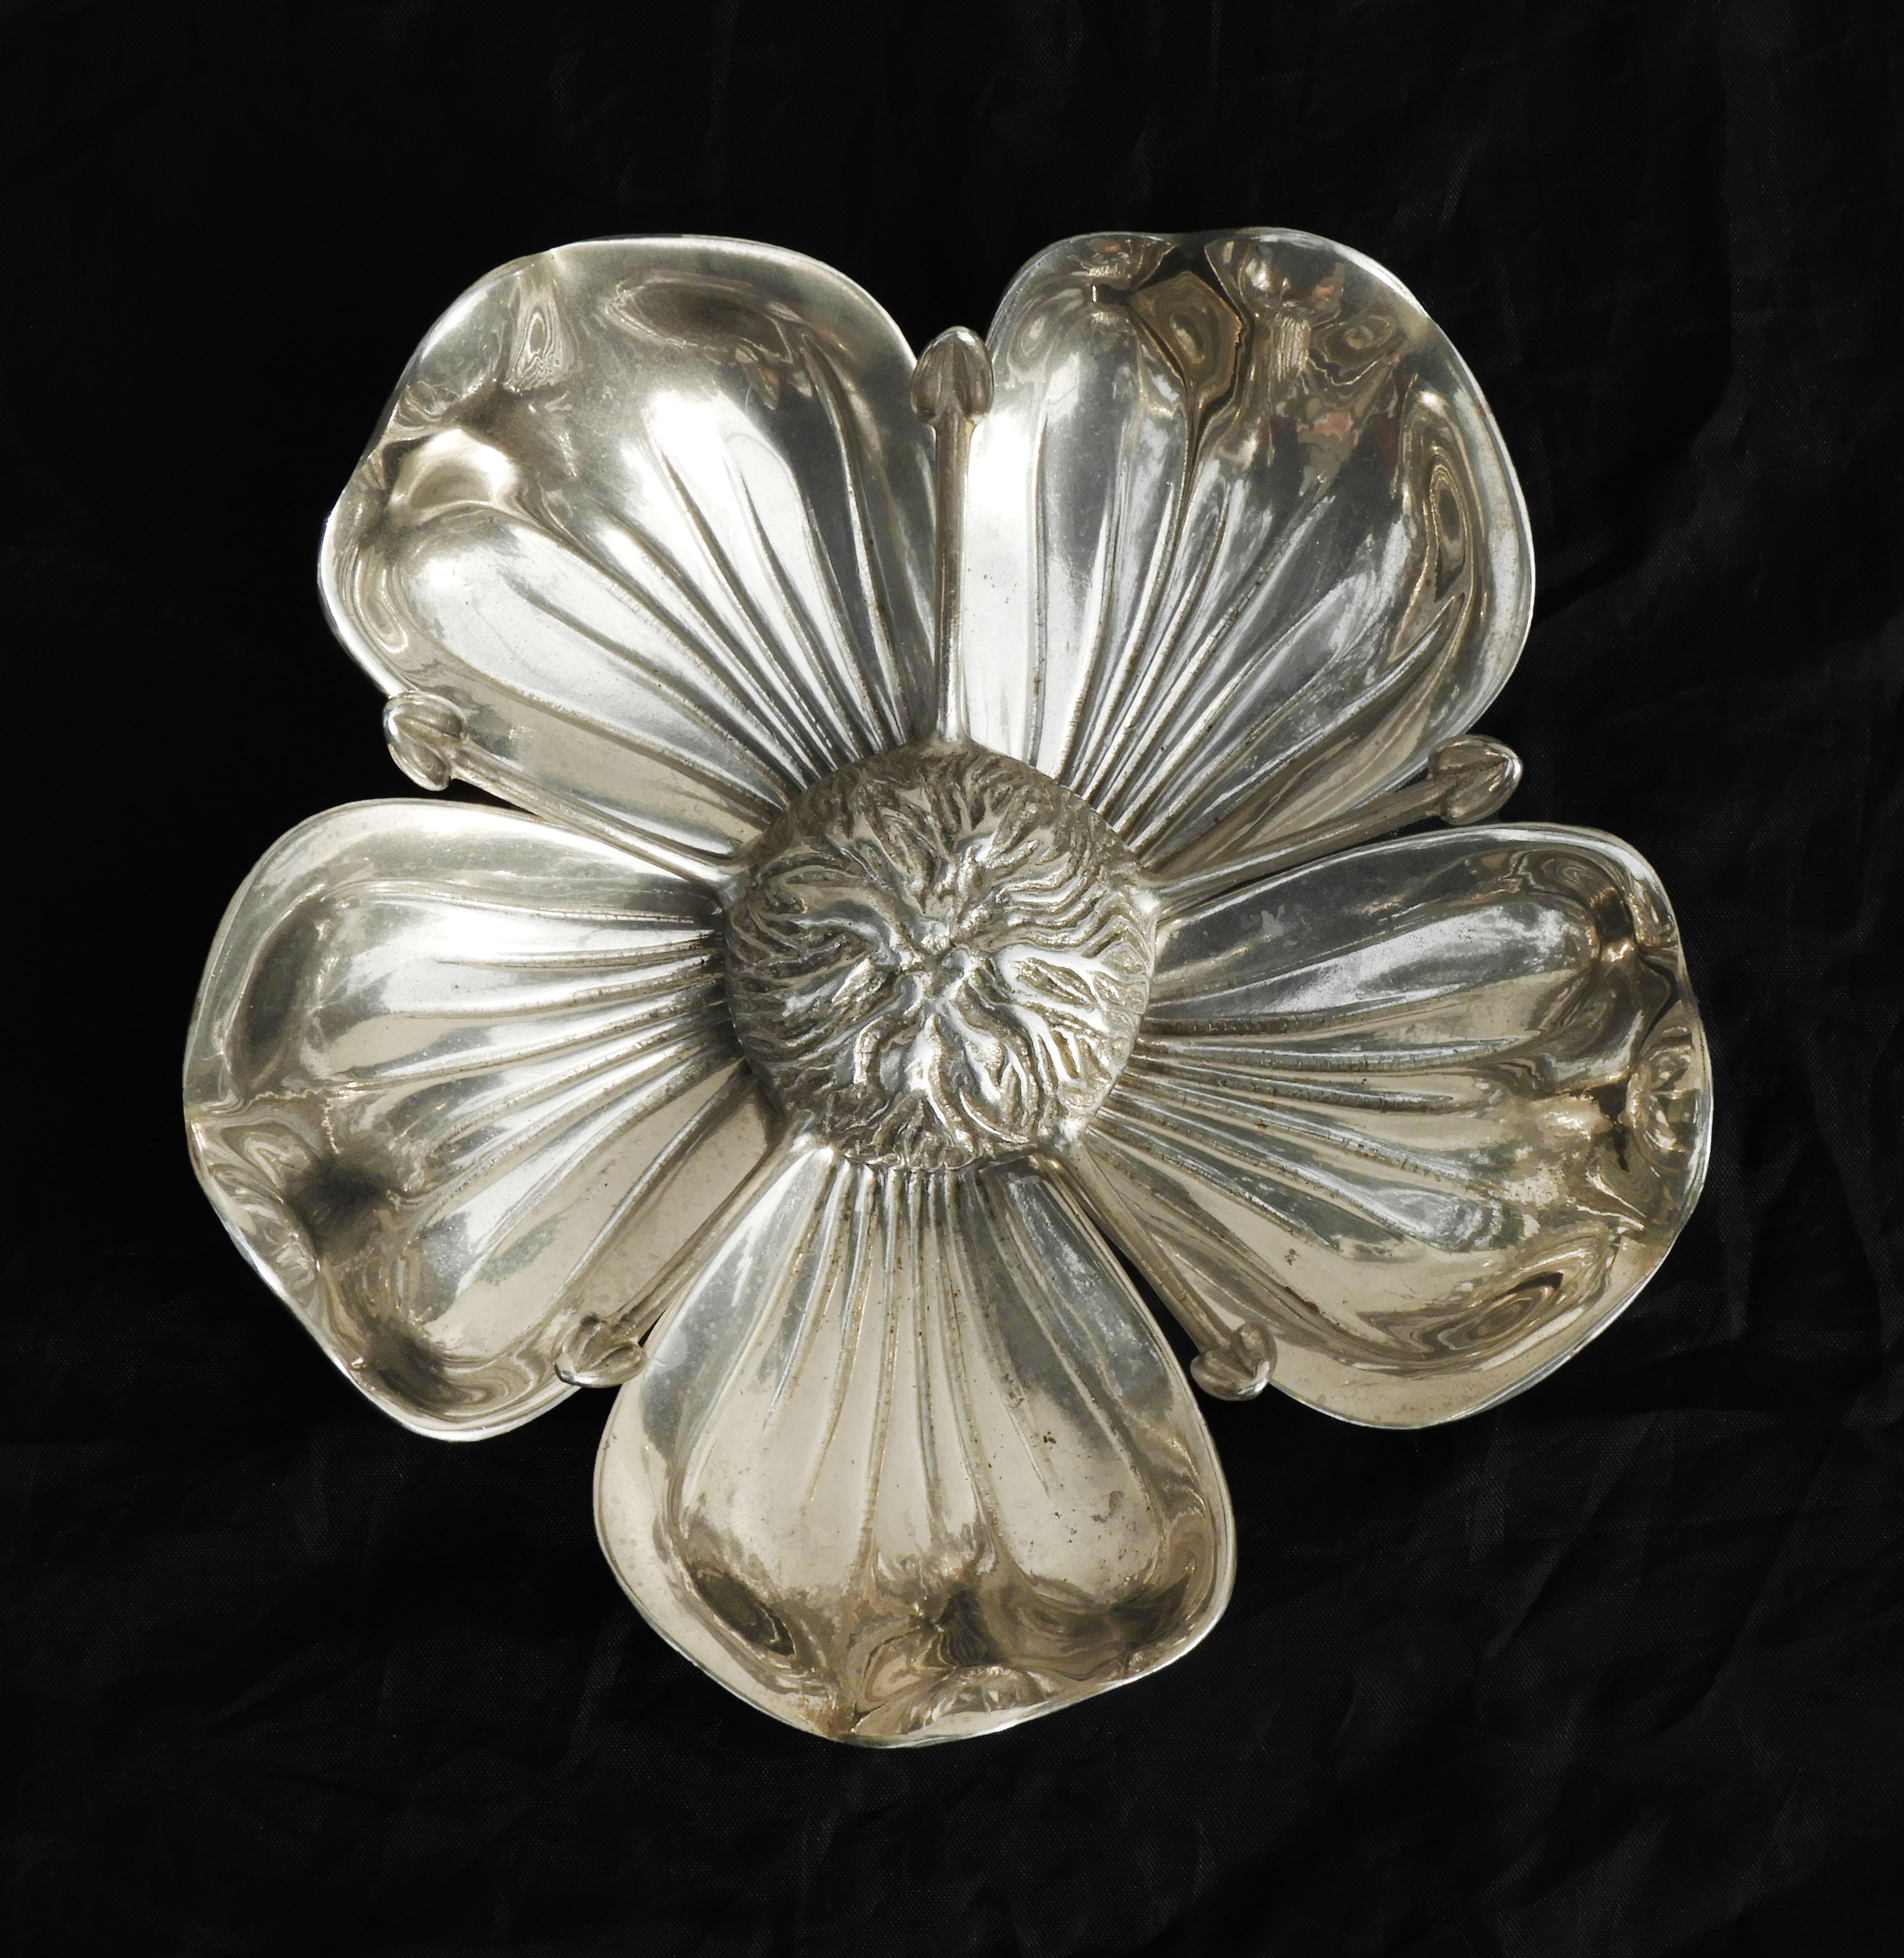 Fabulous Gucci style floral ashtray C1960s Italy.  Beautifully sculptured and cleverly designed piece that sheds its petals to become five individual ashtrays.  A gorgeous addition to any cocktail table or drinks trolley that will work equally well